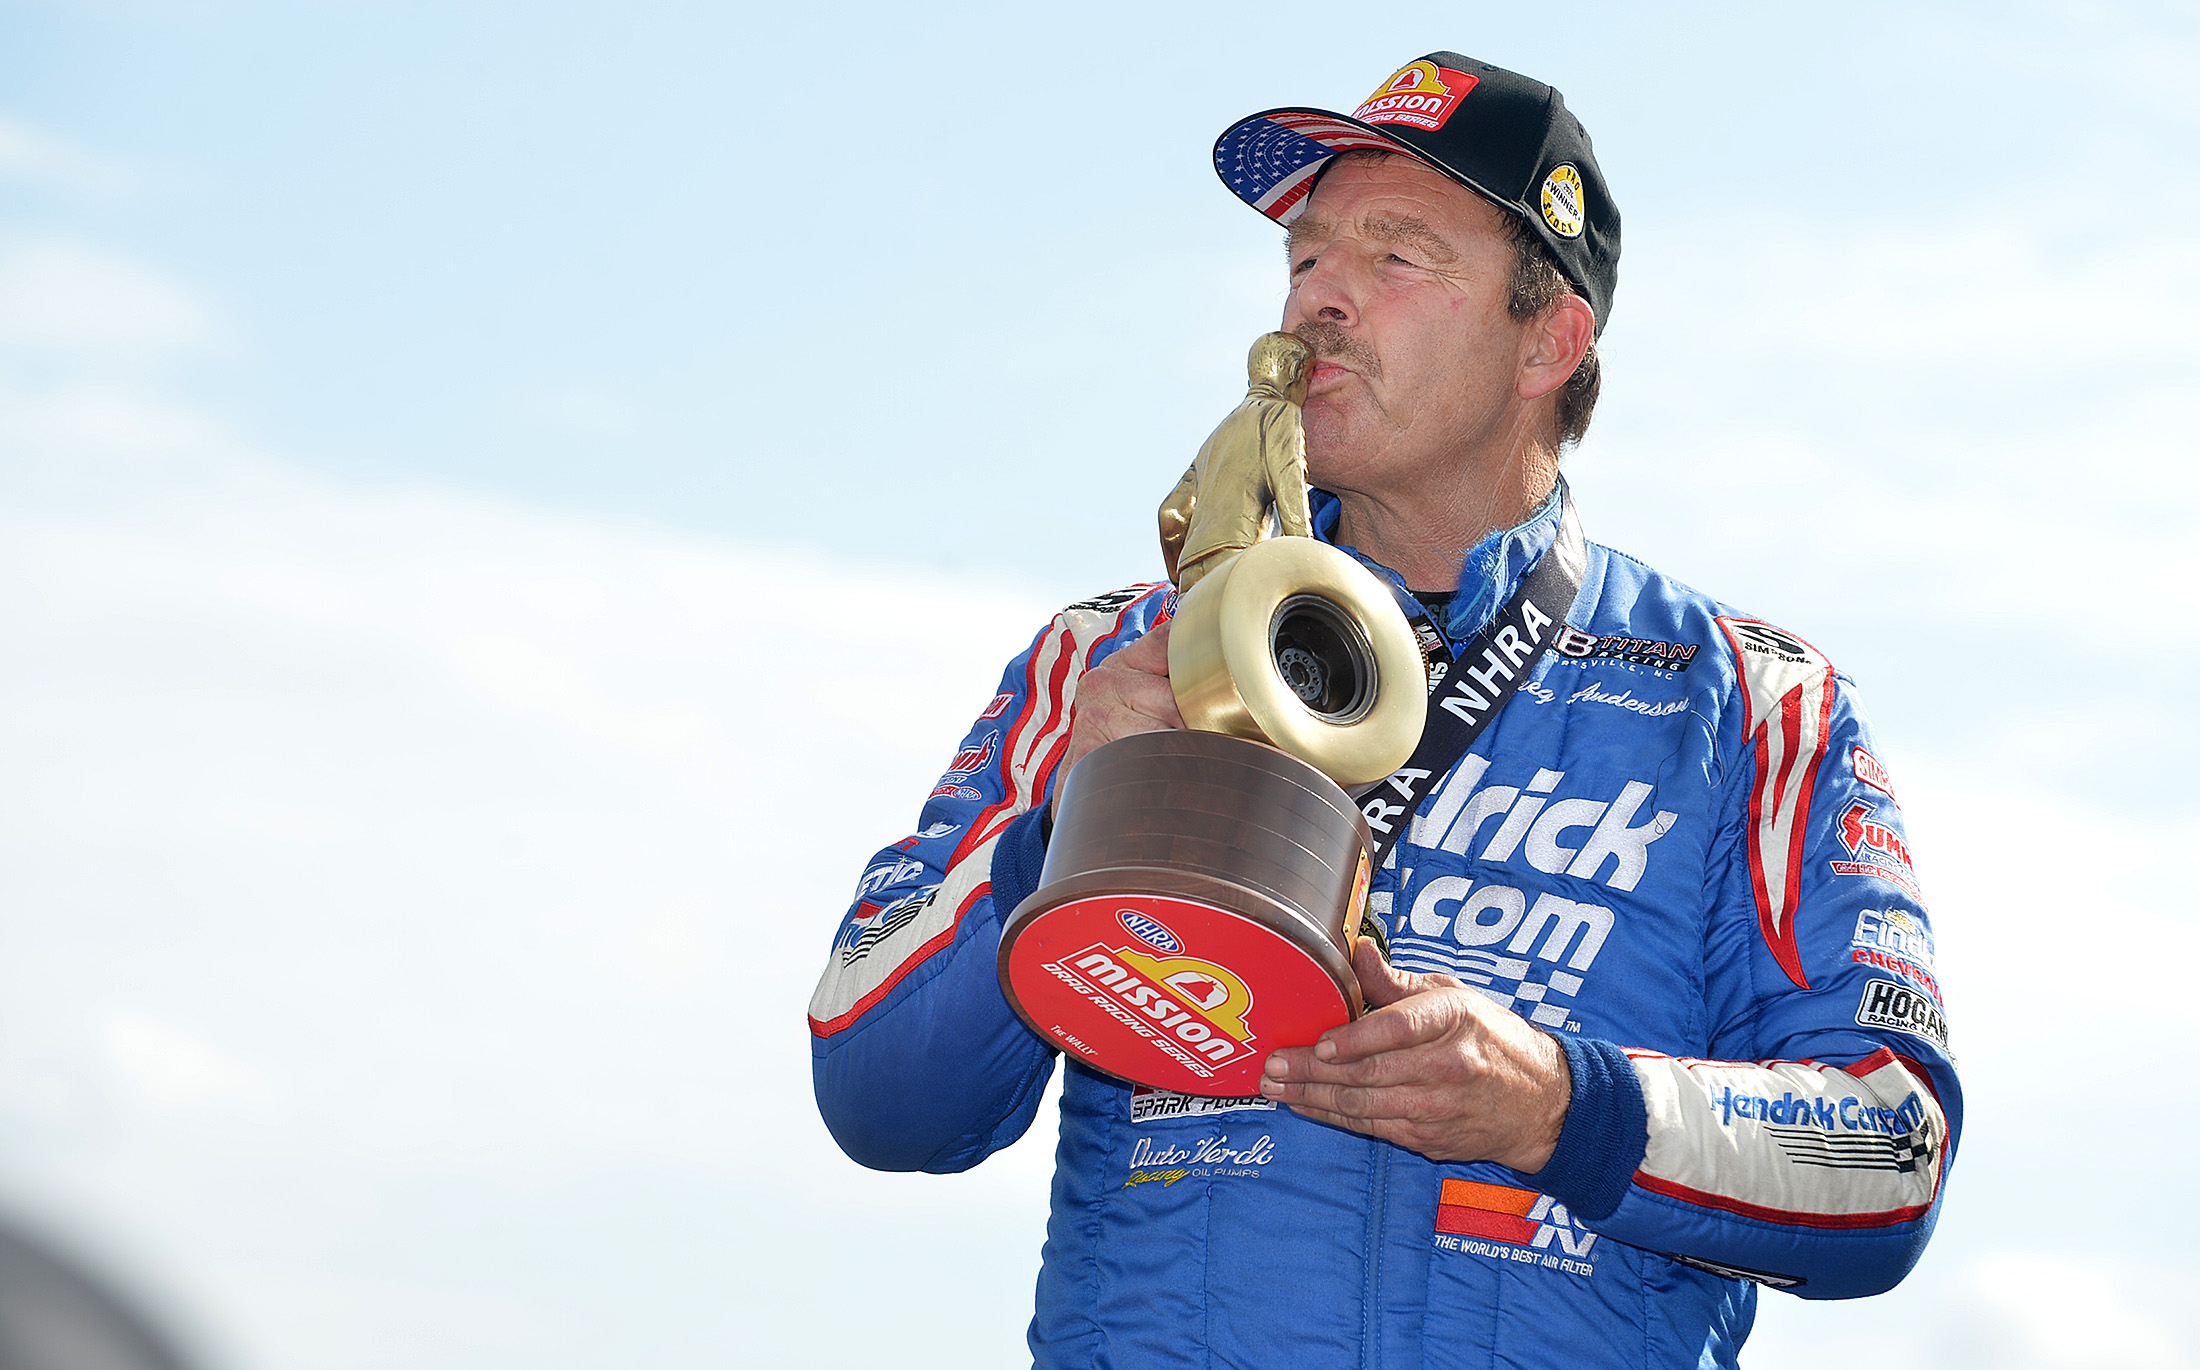 Greg Anderson celebrates his 105th career Pro Stock win at the 4-wide Nationals at zMax Dragway.